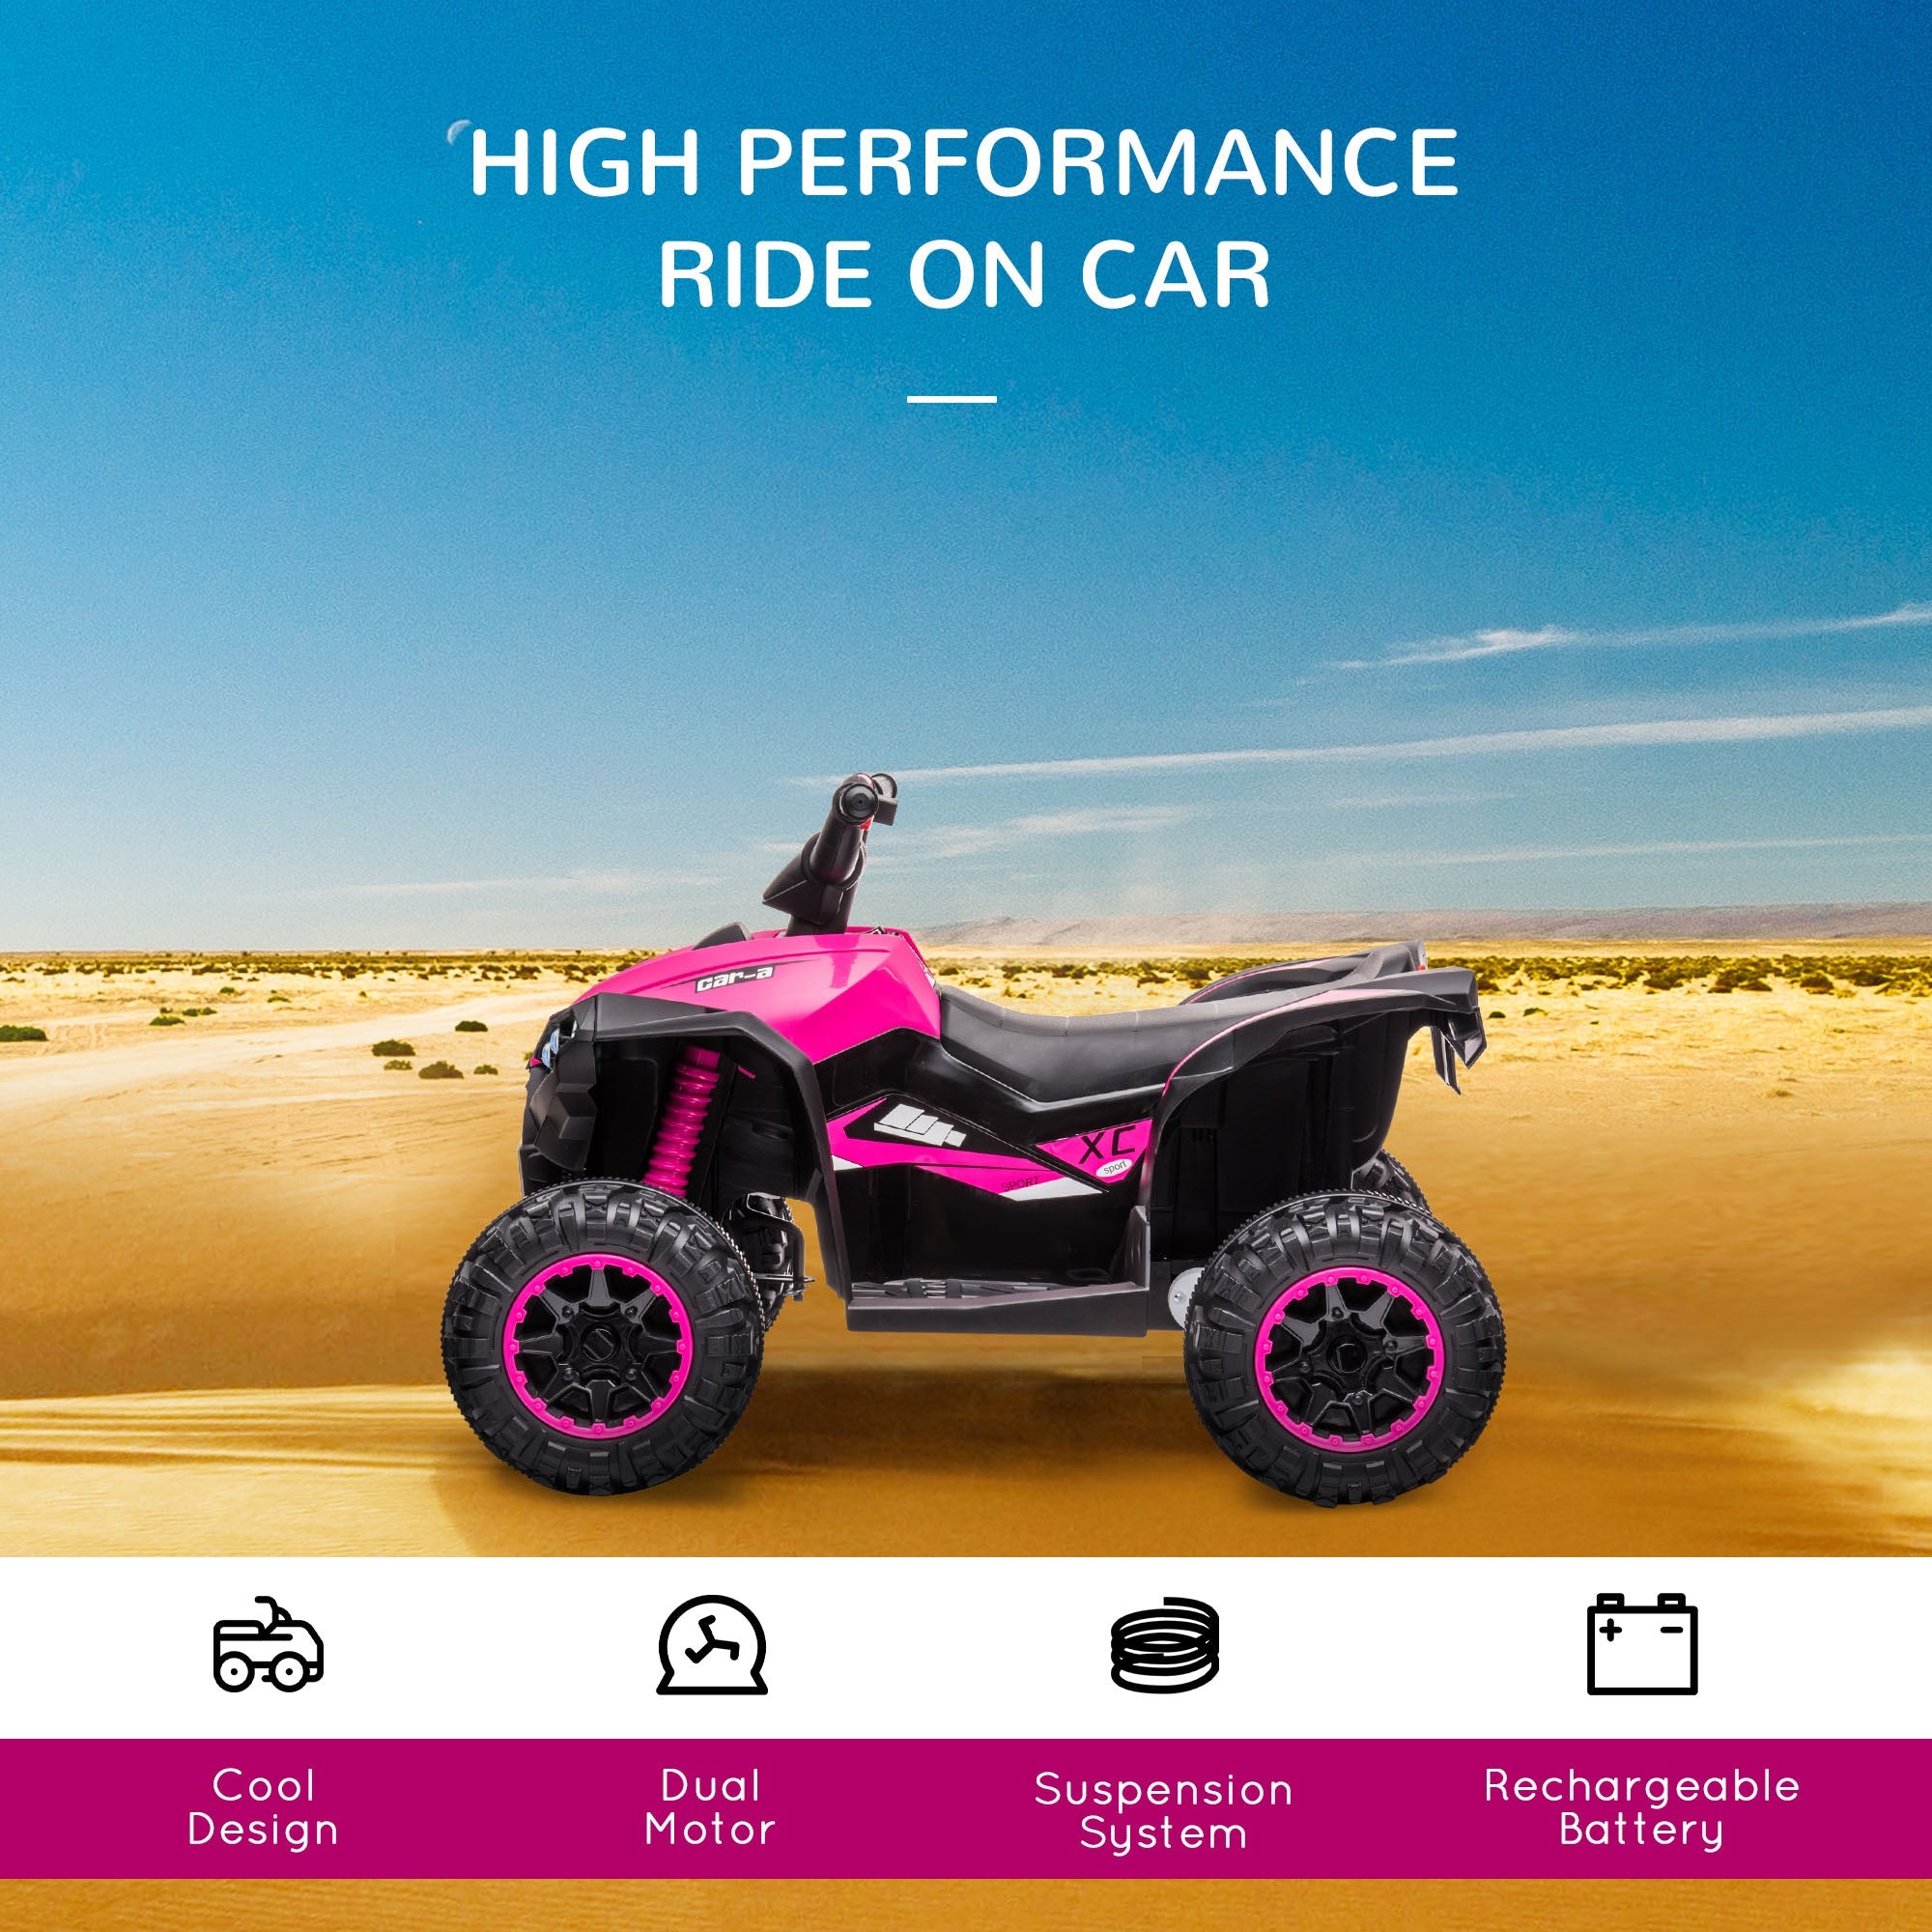 12V Quad Bike with Forward Reverse Functions, Ride on Car ATV Toy with High/Low Speed, Slow Start, Suspension System, Horn, Music, Pink-3